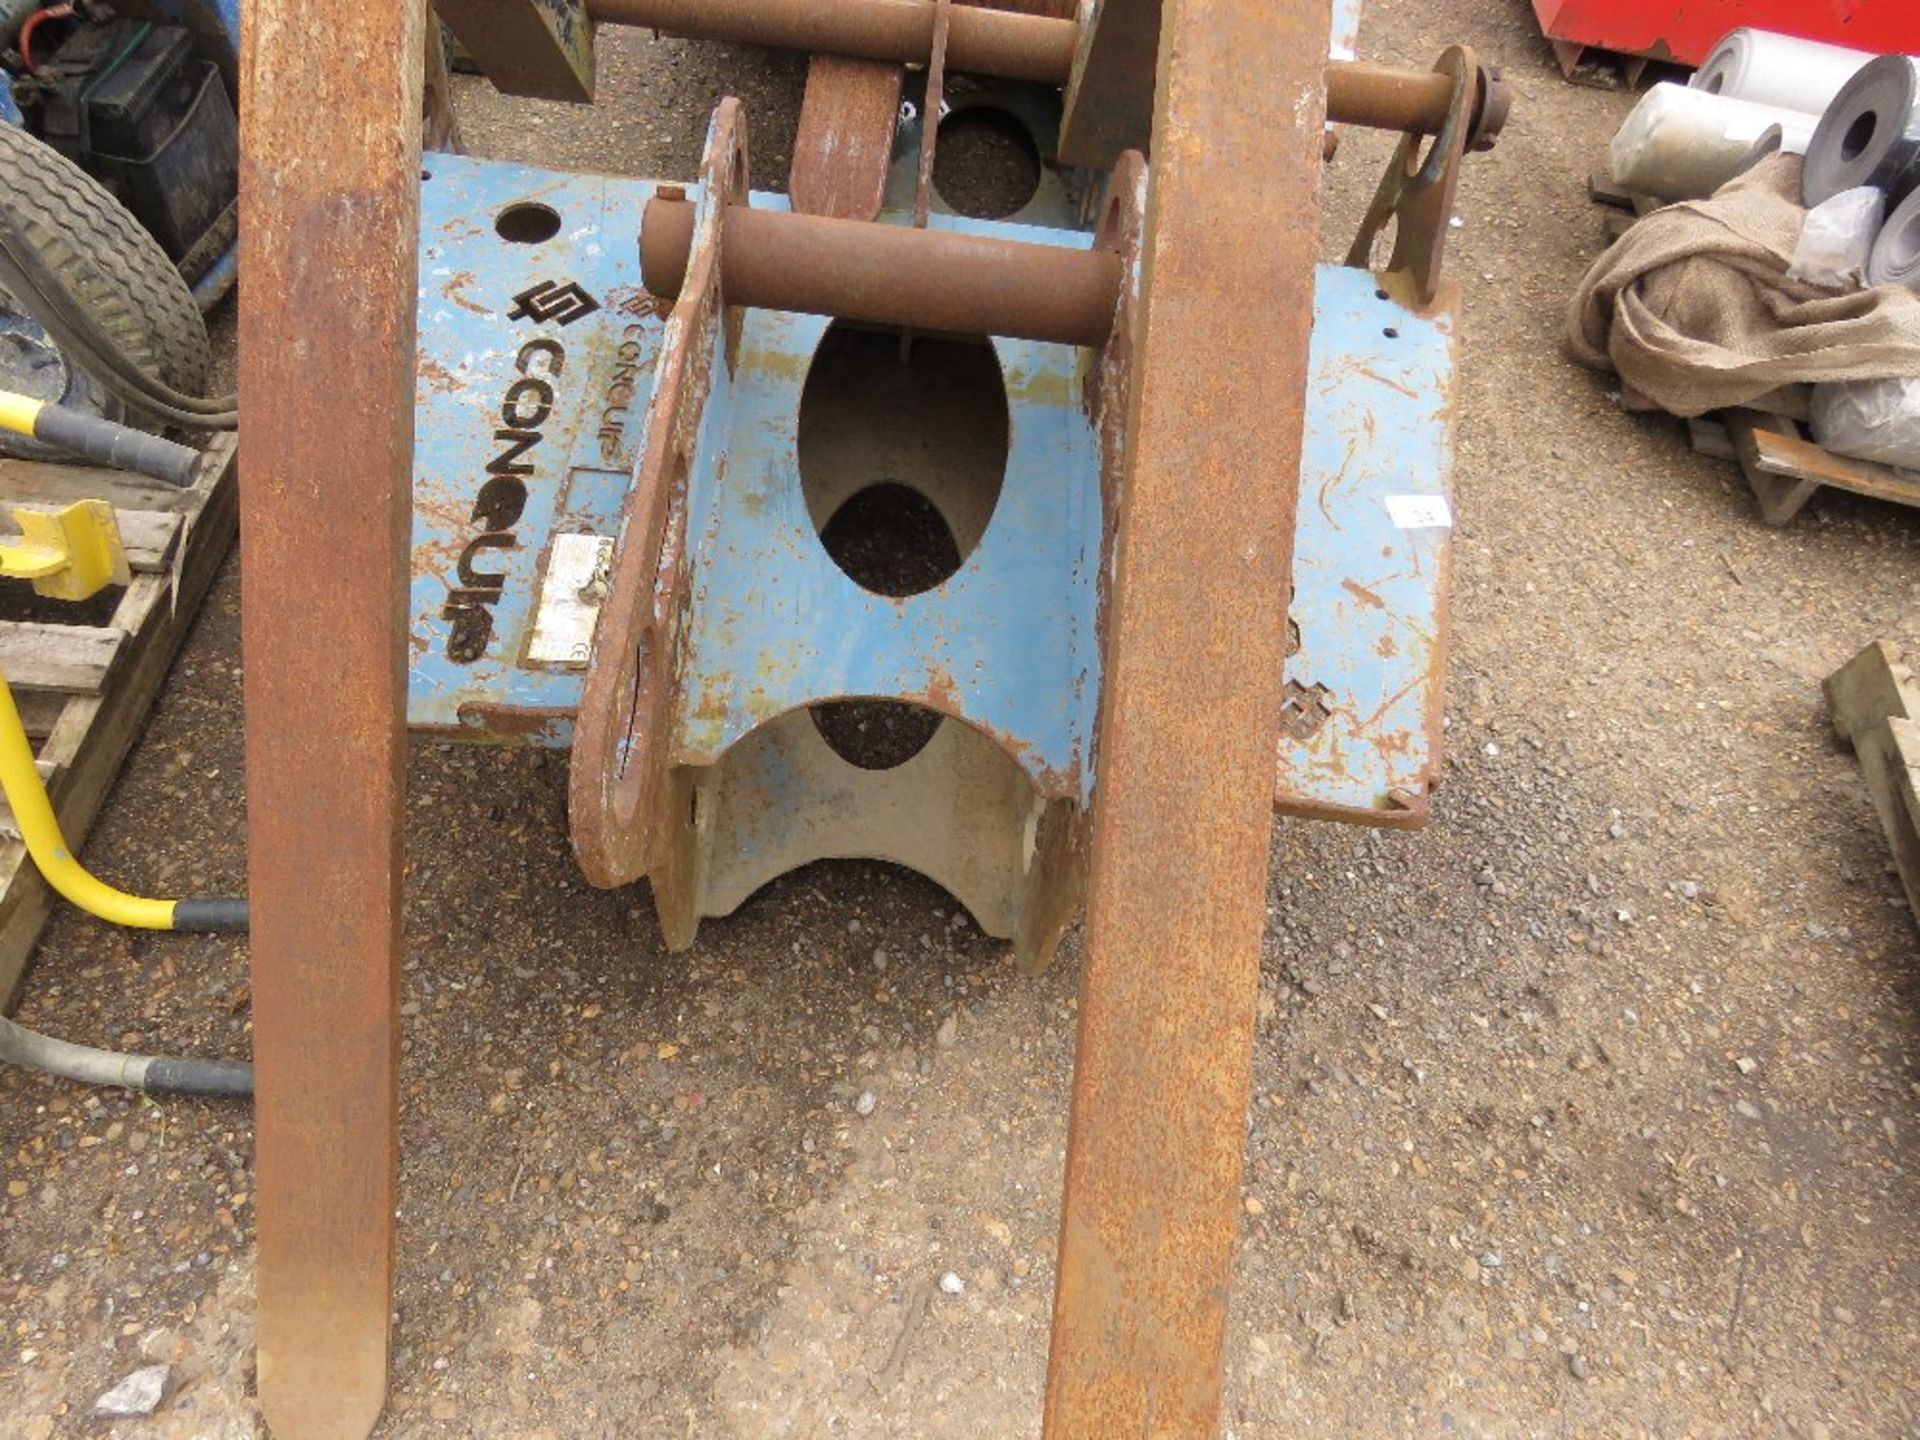 SET OF CONQUIP EXCAVATOR MOUNTED PALLET FORKS. SOURCED FROM COMPANY LIQUIDATION. - Image 2 of 5